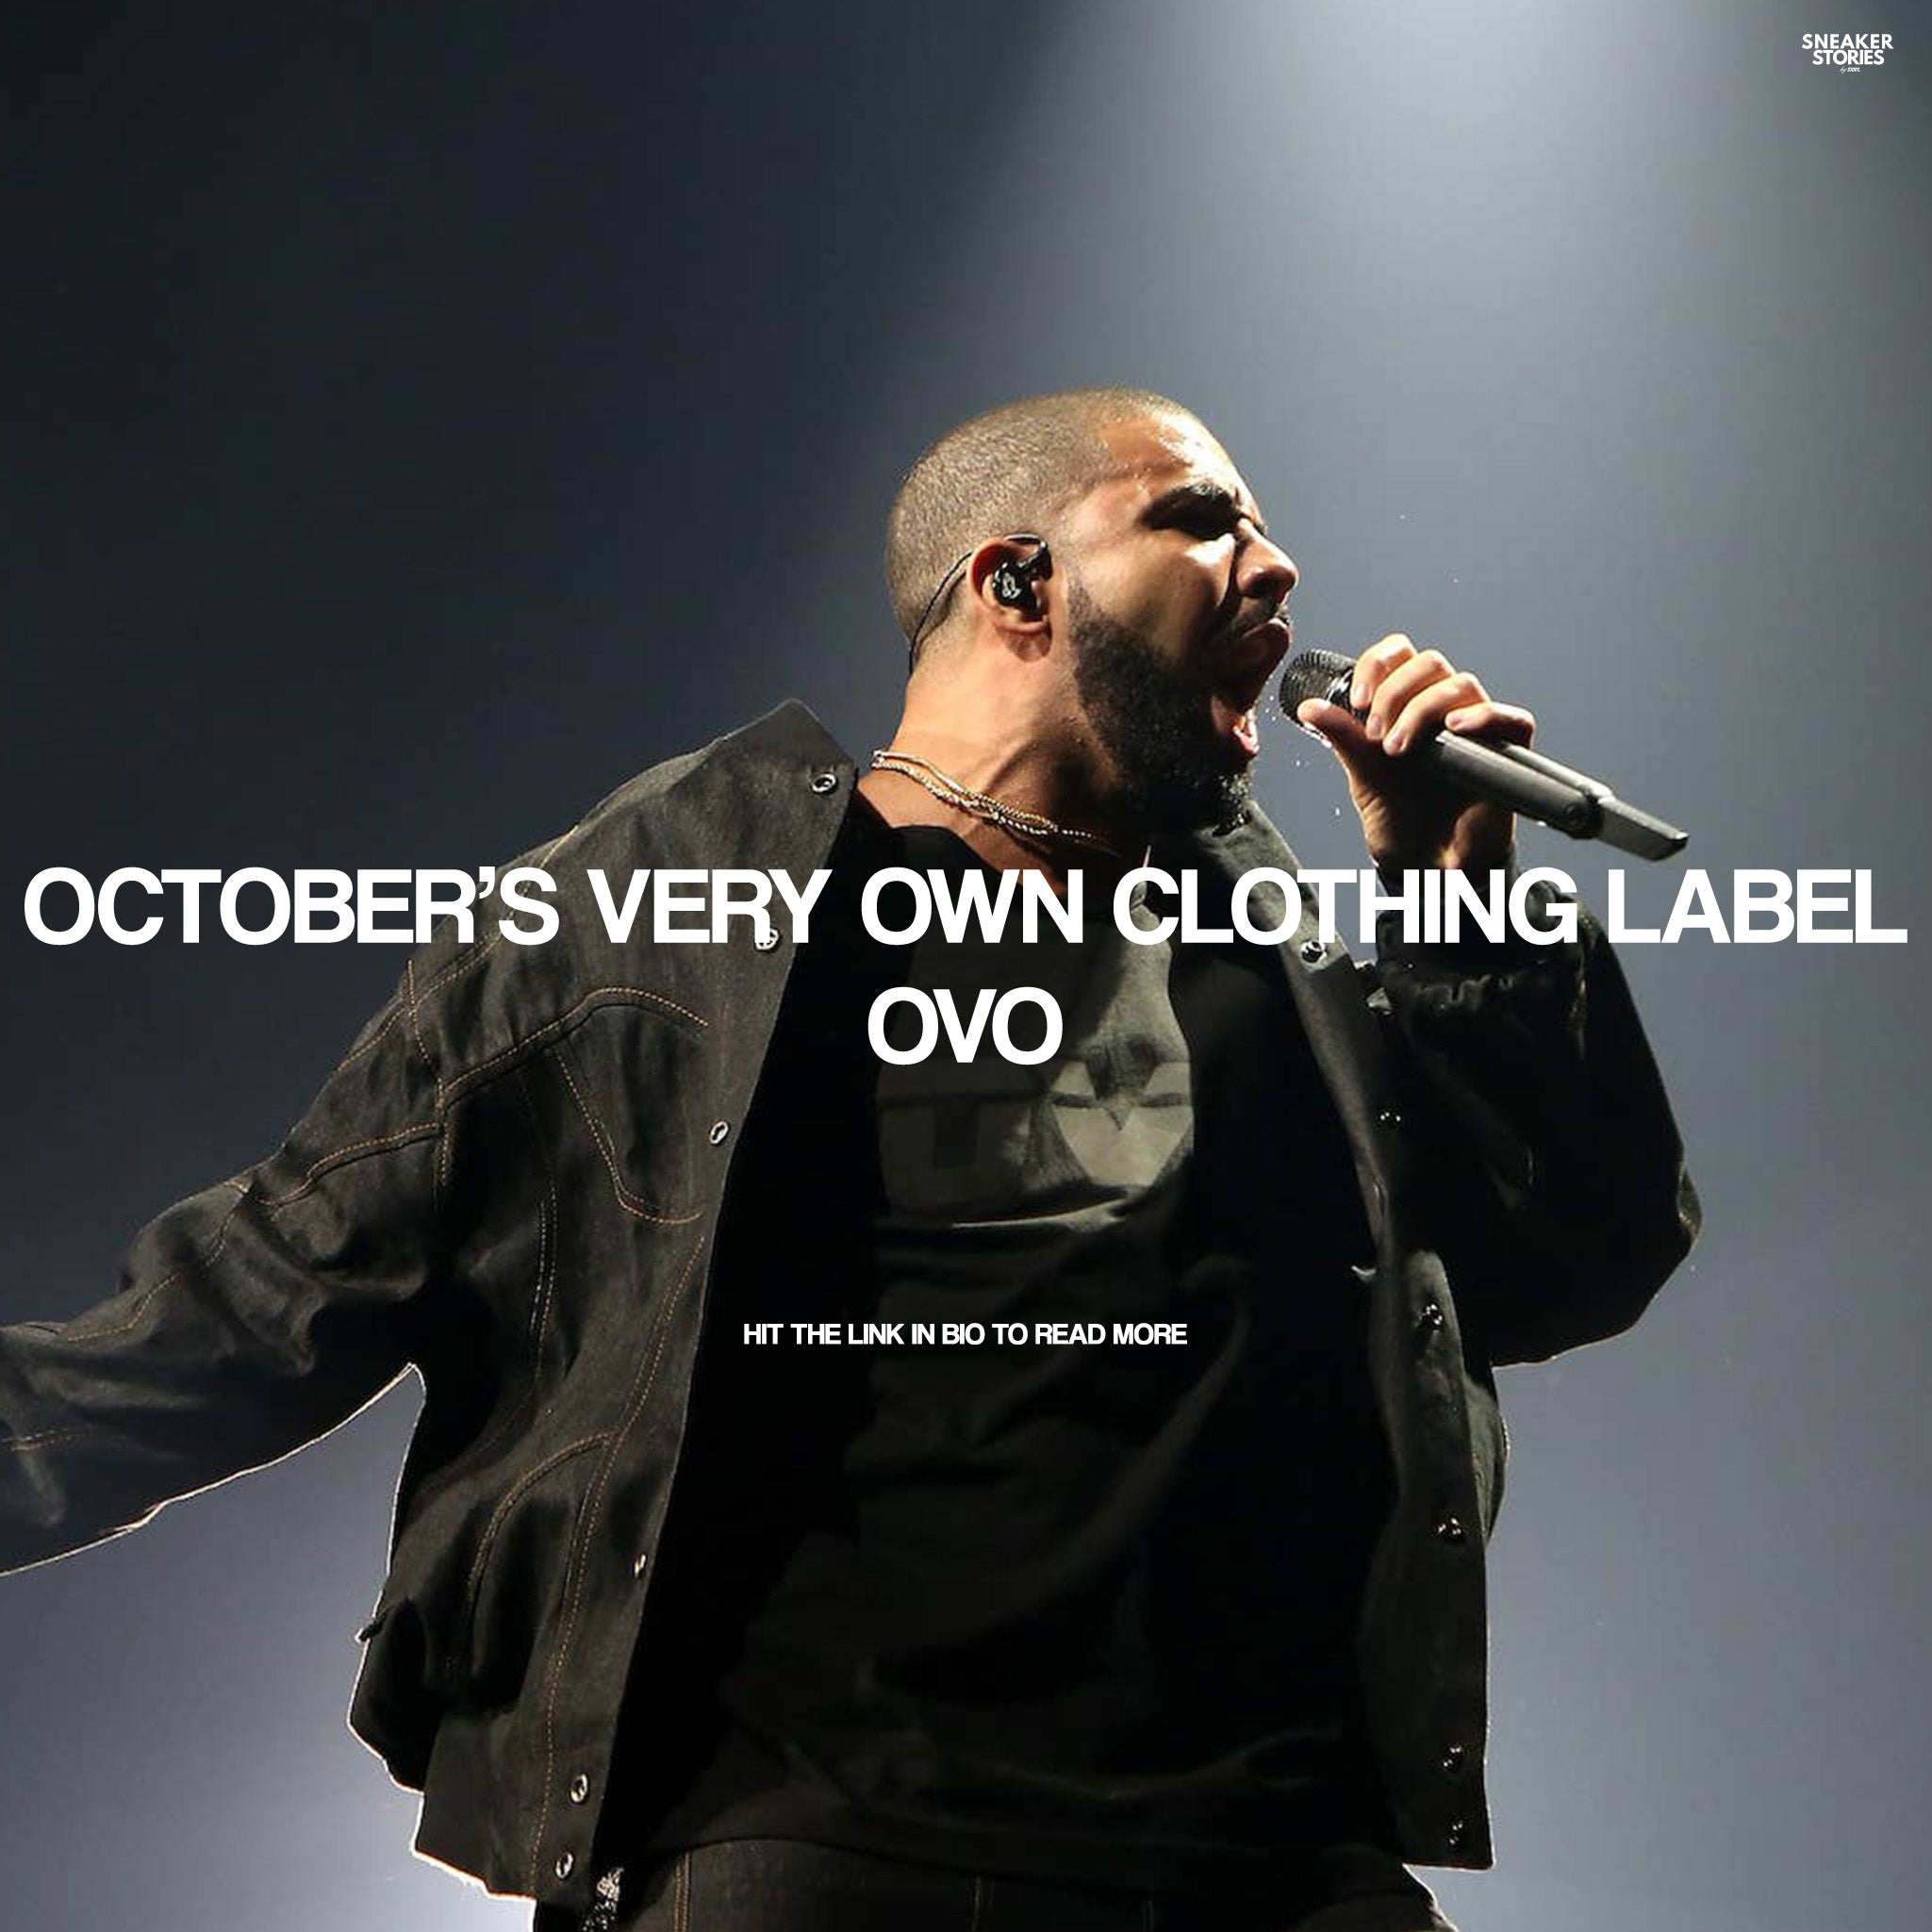 October’s Very Own clothing label OVO